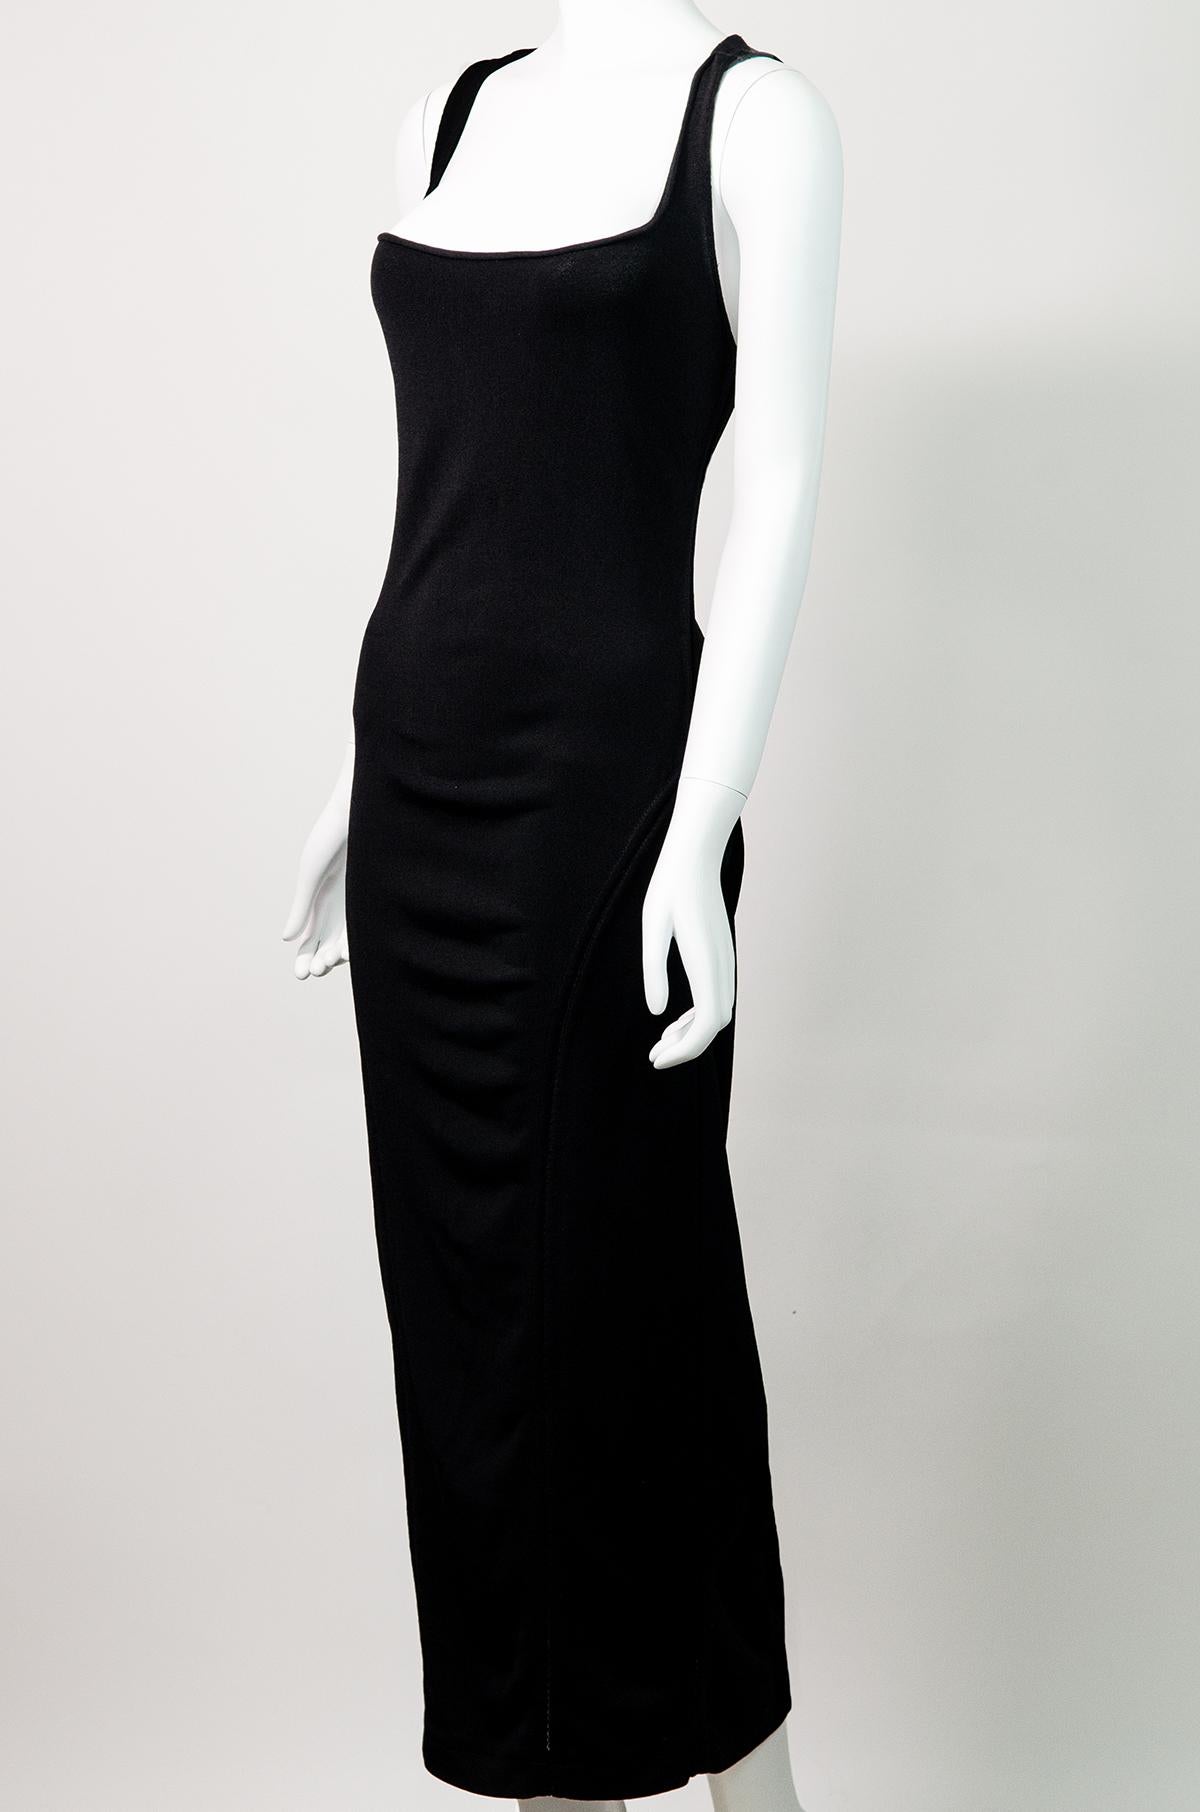 AZZEDINE ALAÏA S/S 1988 Runway Knit Maxi Dress M In Excellent Condition For Sale In Berlin, BE